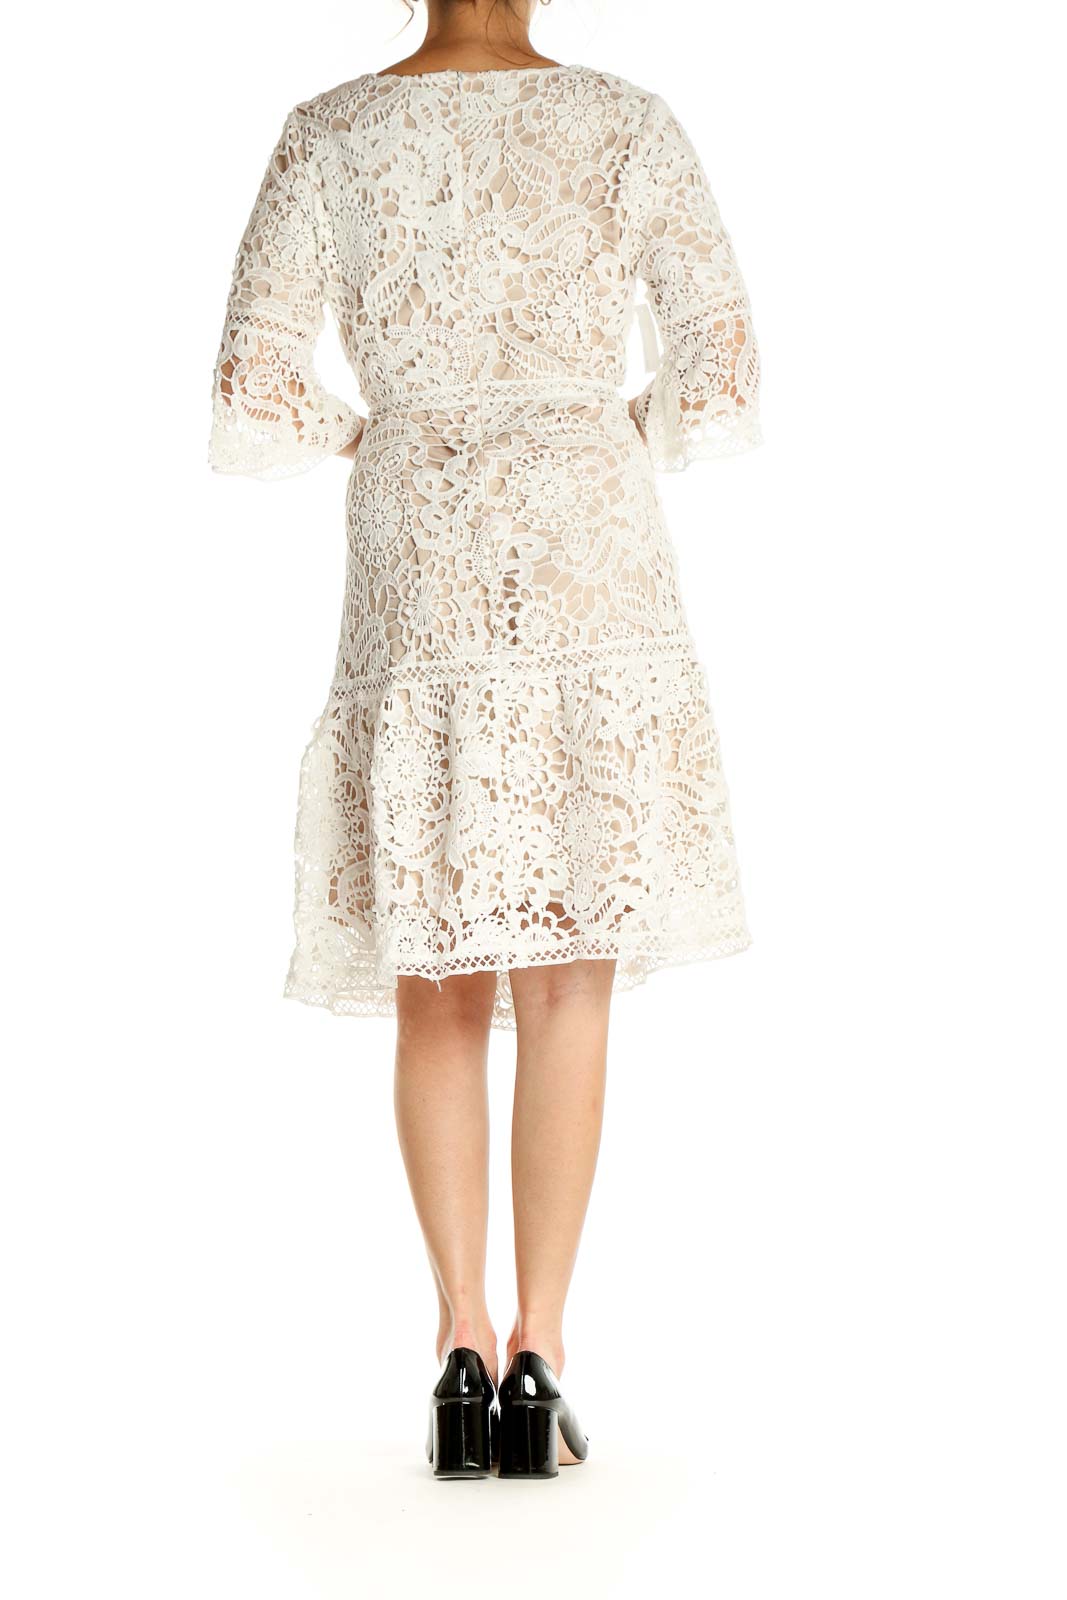 Lace It Back Sheath by MSGM for $195